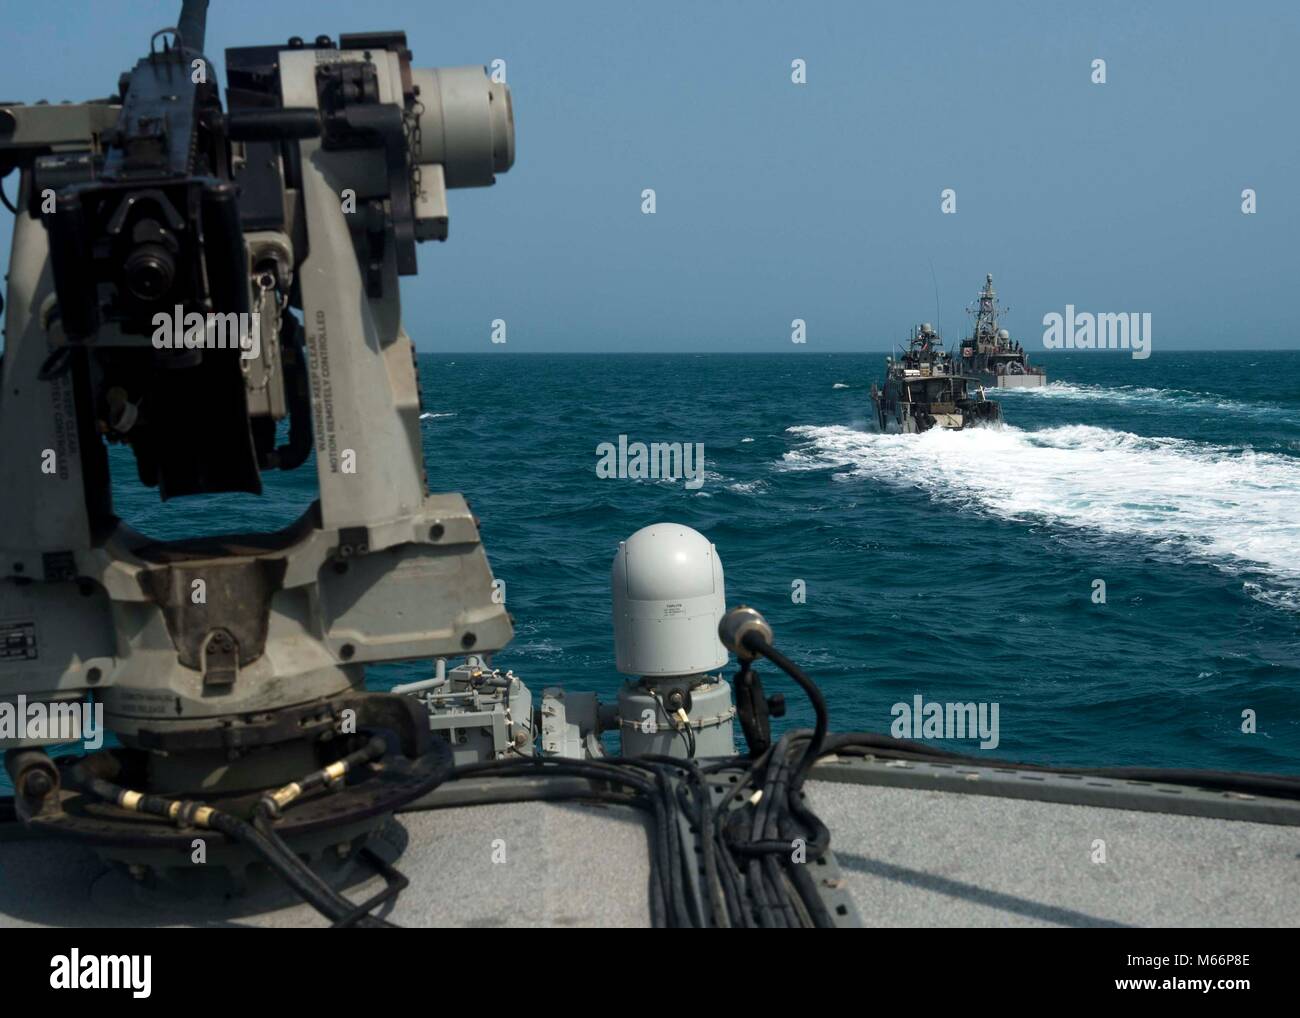 180228-N- IT566-108 MANAMA, Bahrain (Feb. 28, 2018) Mark VI Patrol  patrol Boatsboats, assigned to Coastal Riverine Squadron 4, and the cyclone  cyclone-class coastal patrol ship USS Chinook (PC 9) conduct formation  and tactical maneuvering drills as part of Neon Response 18. Neon Response  18 is a bilateral maritime security and explosive ordnance disposal exercise  between the U.S. Navy and Bahrain Defence ForceBDFdesigned to enhance  interoperability. (U.S. Navy photo by Mass Communication Specialist 1st  Class David Kolmel/Released) Stock Photo